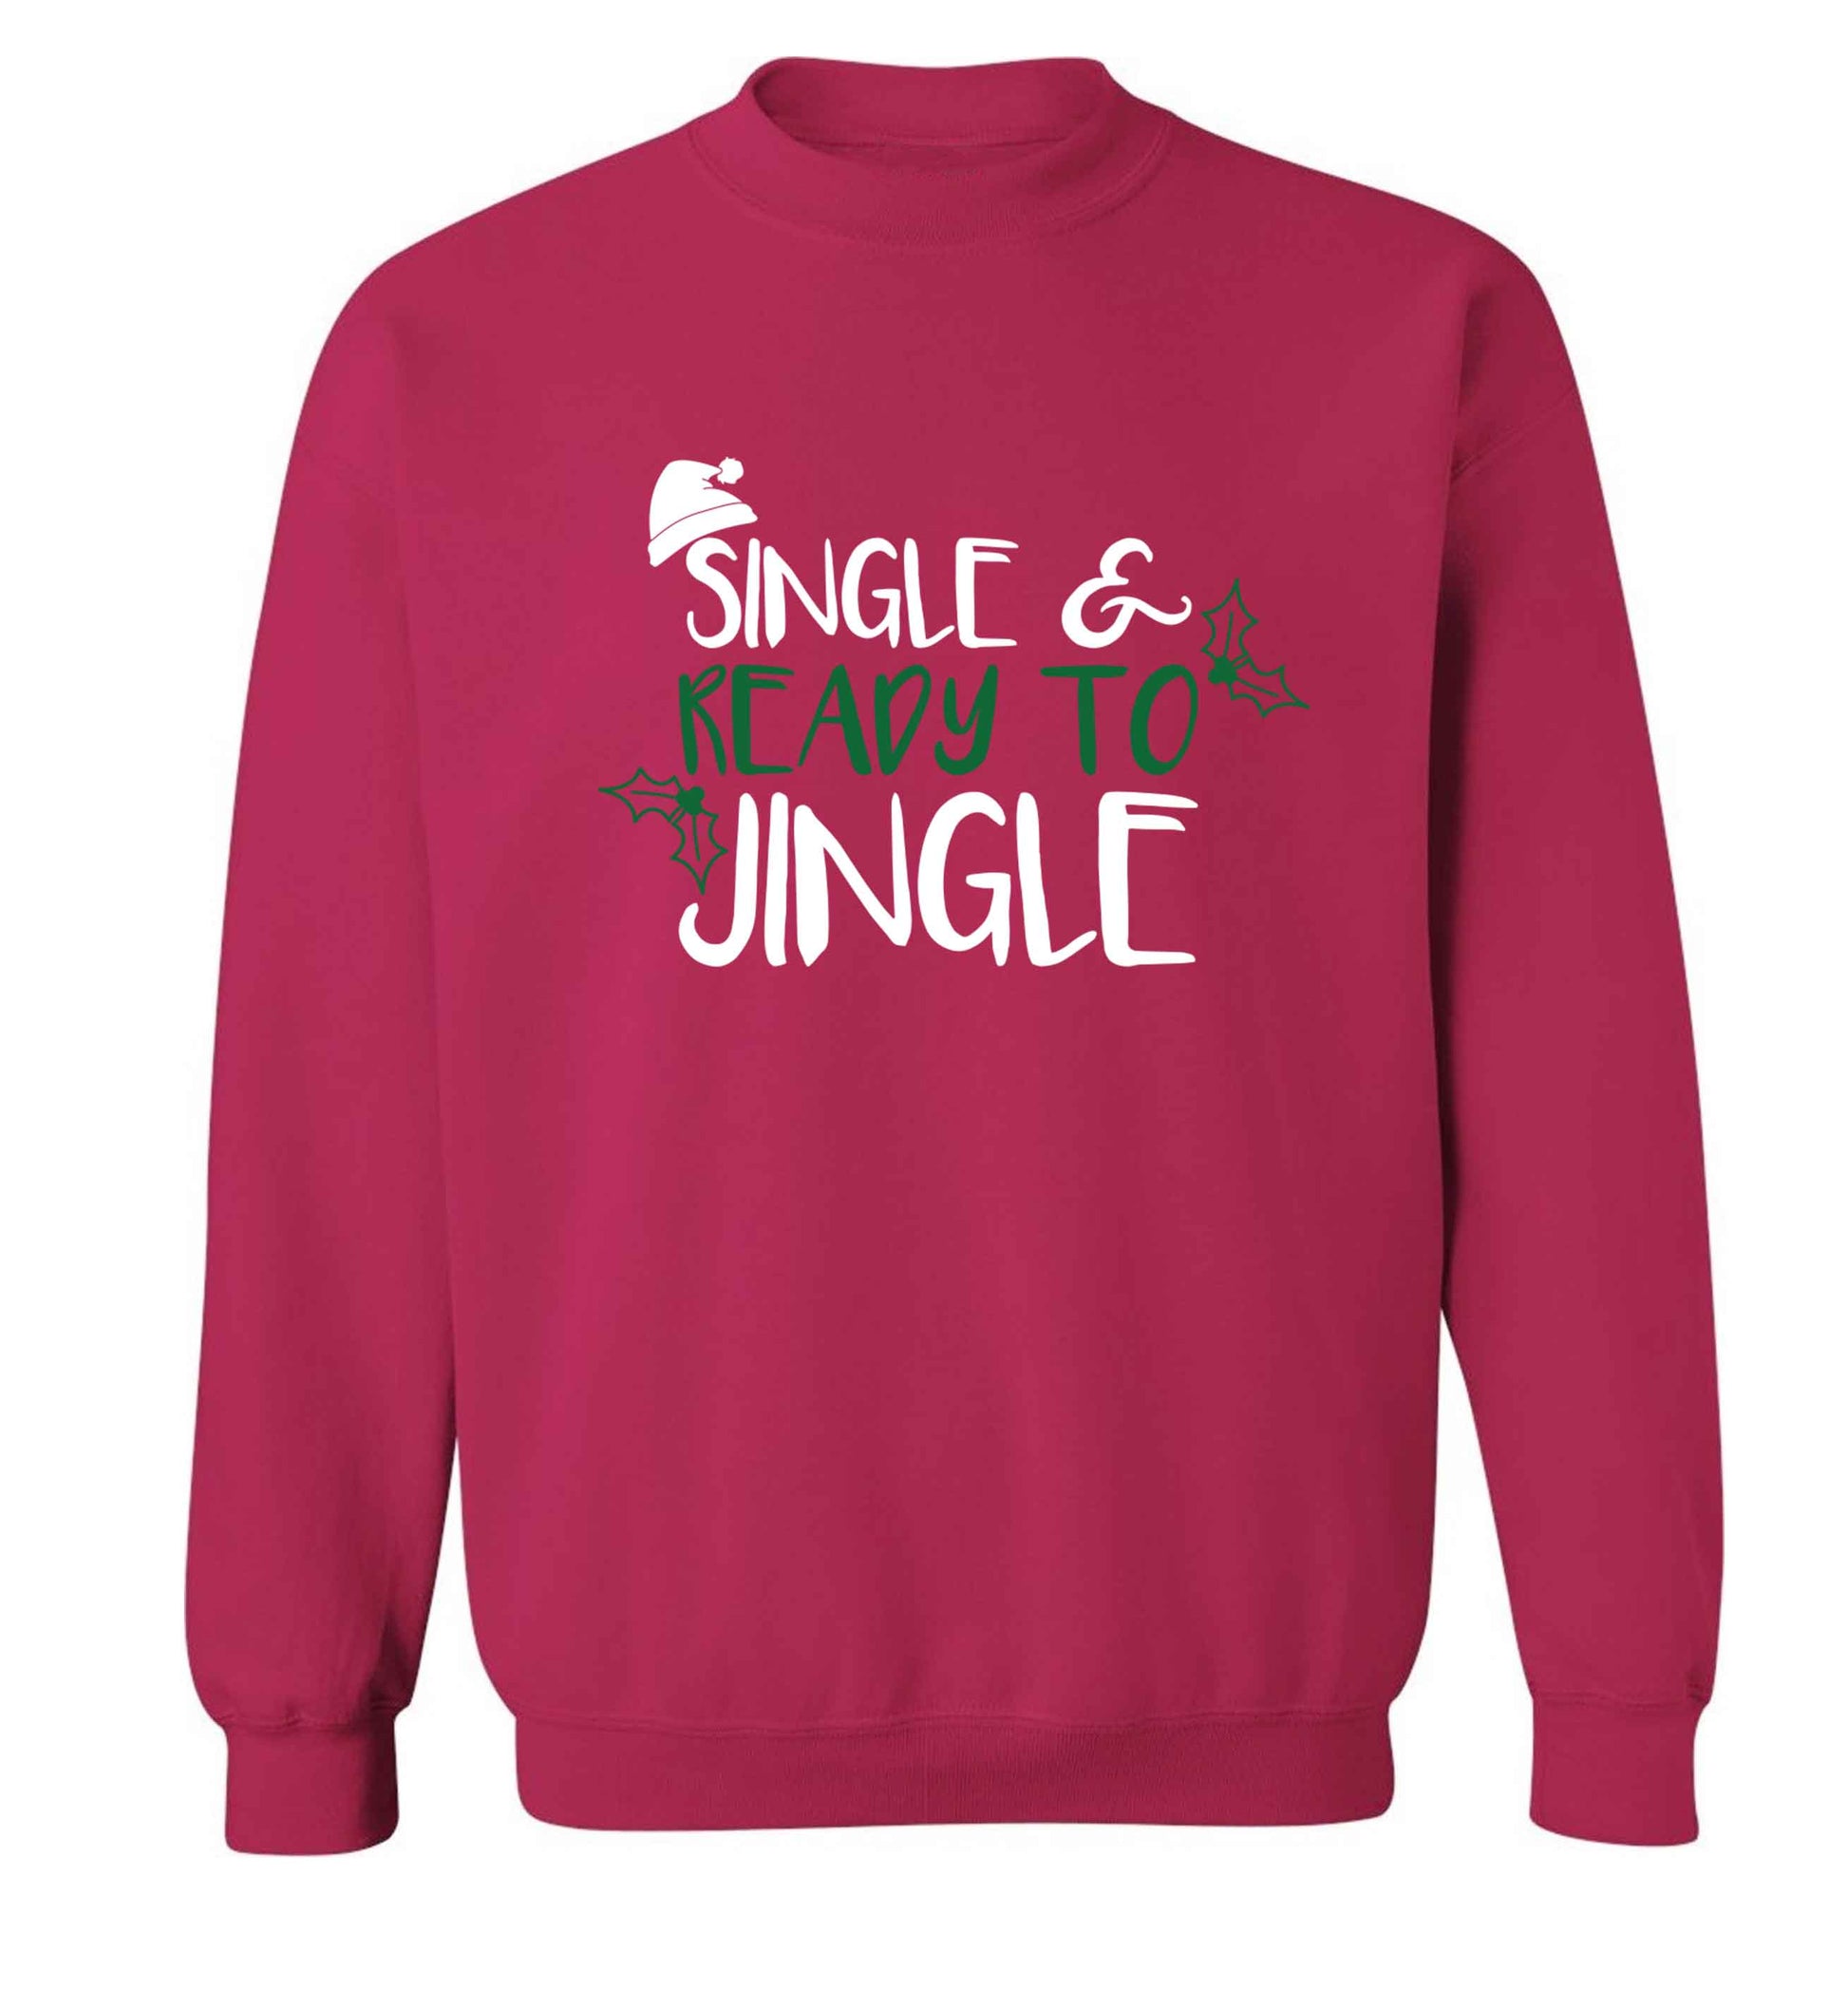 Single and ready to jingle Adult's unisex pink Sweater 2XL